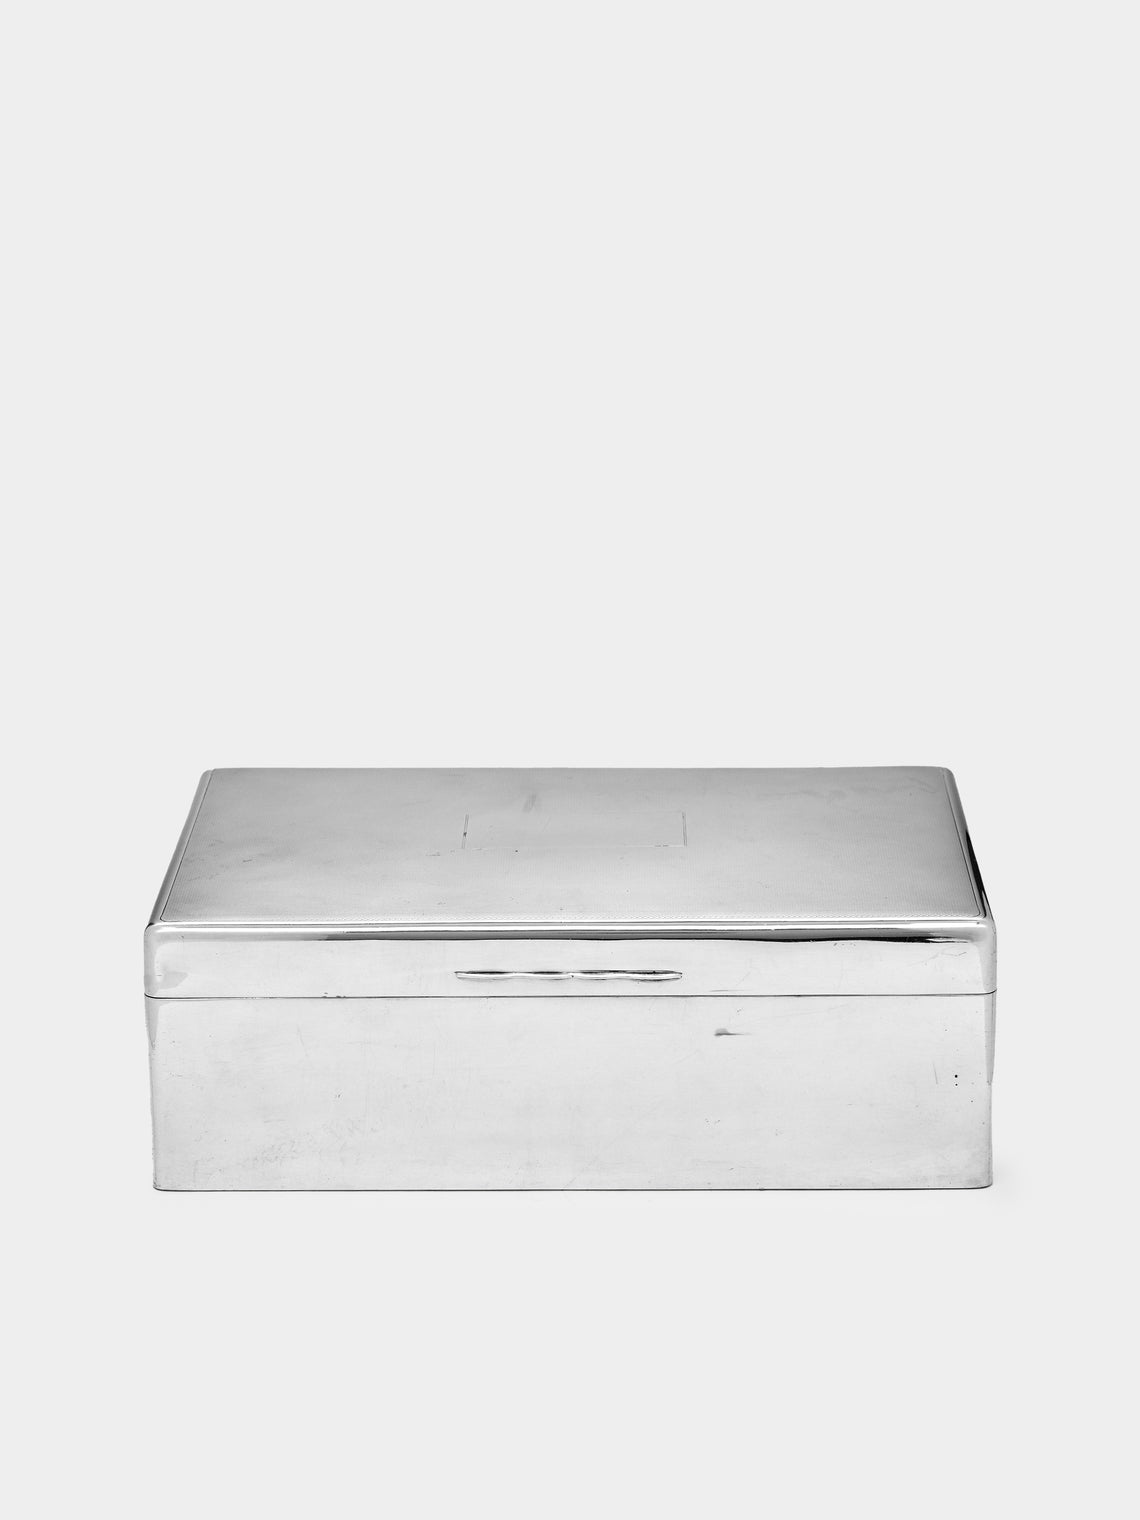 Antique and Vintage - 1990s Sterling Silver Box -  - ABASK - 